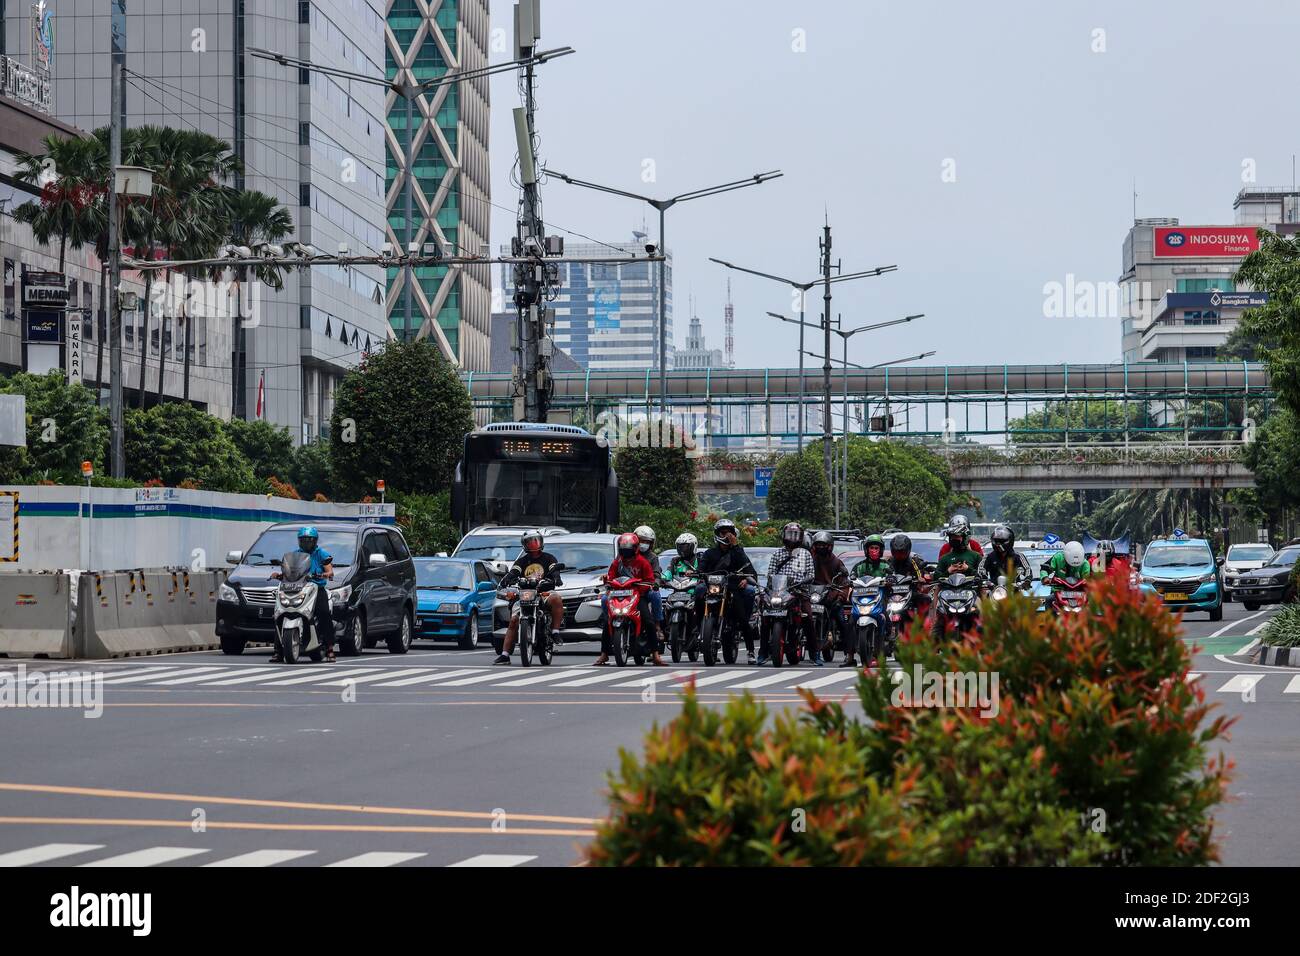 Jakarta, Indonesia - 25 October 2020. Motorcyclists and cars stopped at traffic lights Stock Photo